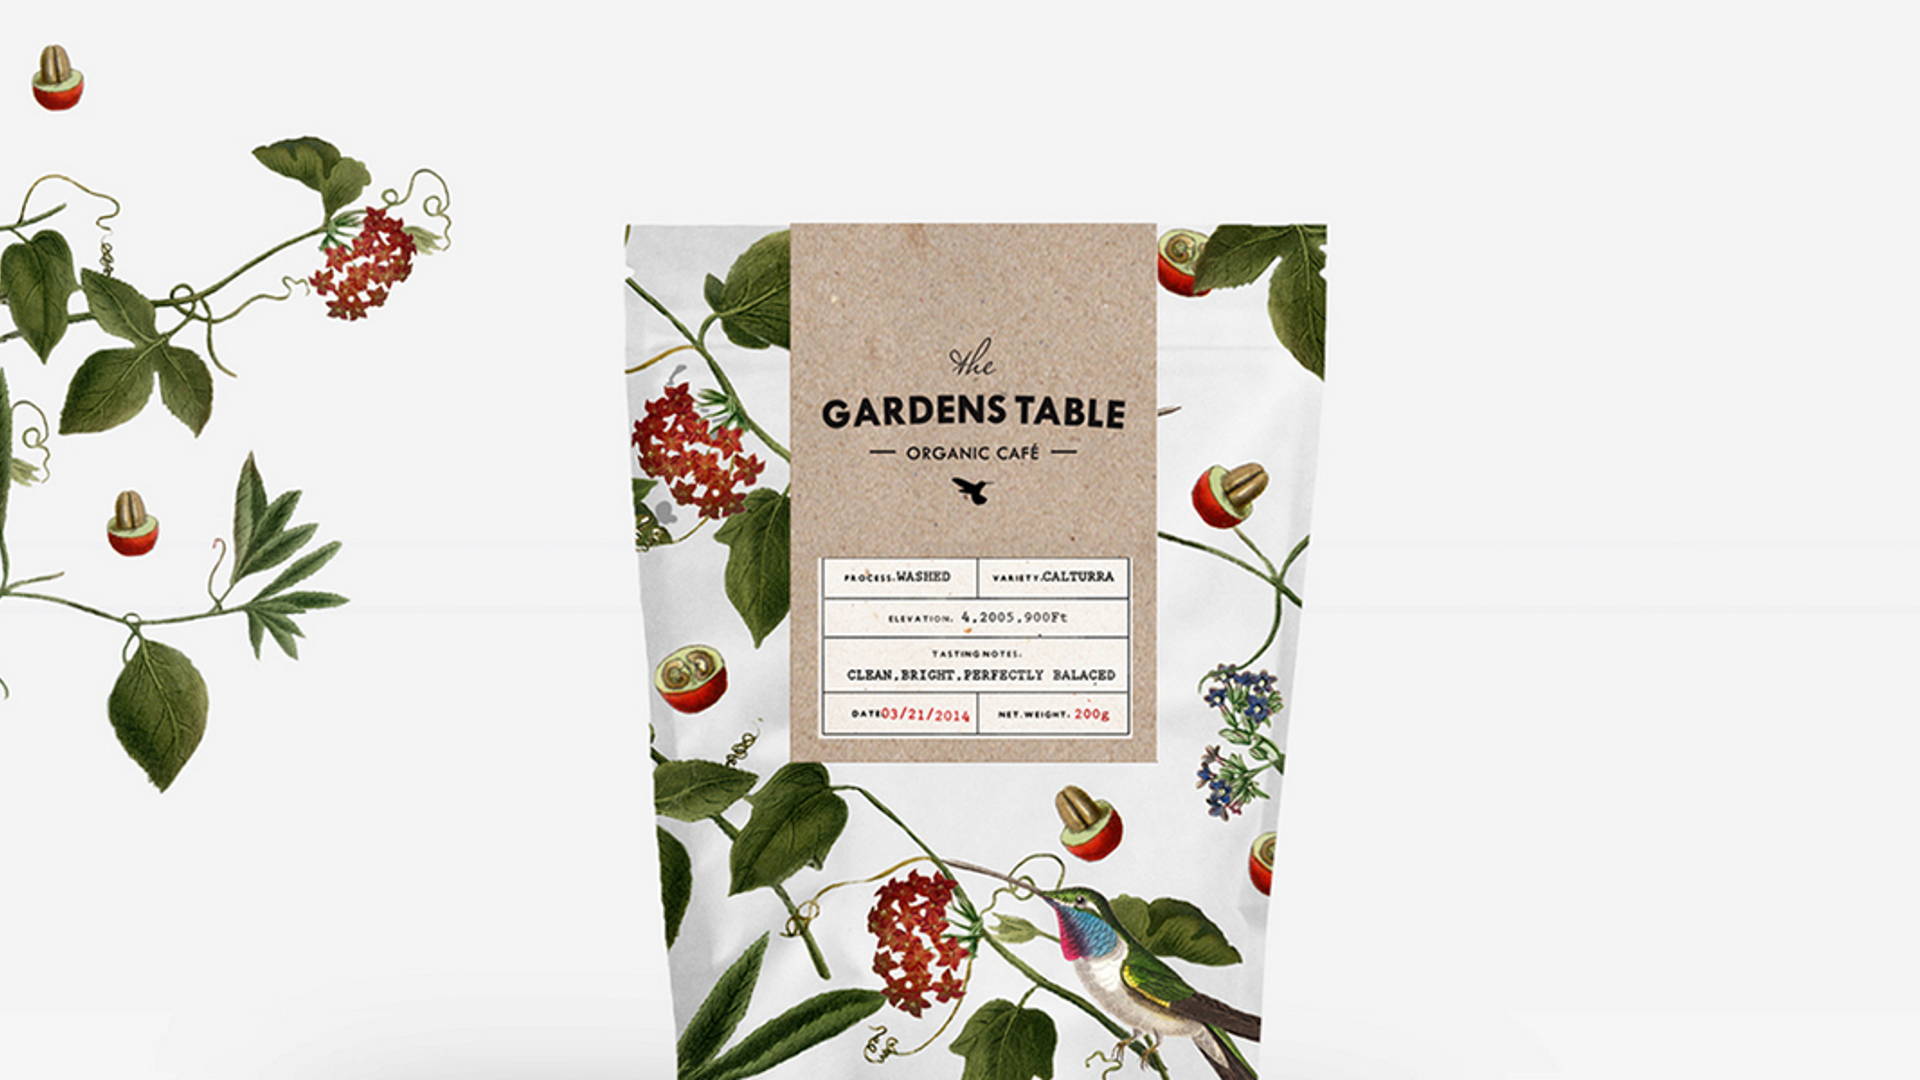 Featured image for The Gardens Table organic café